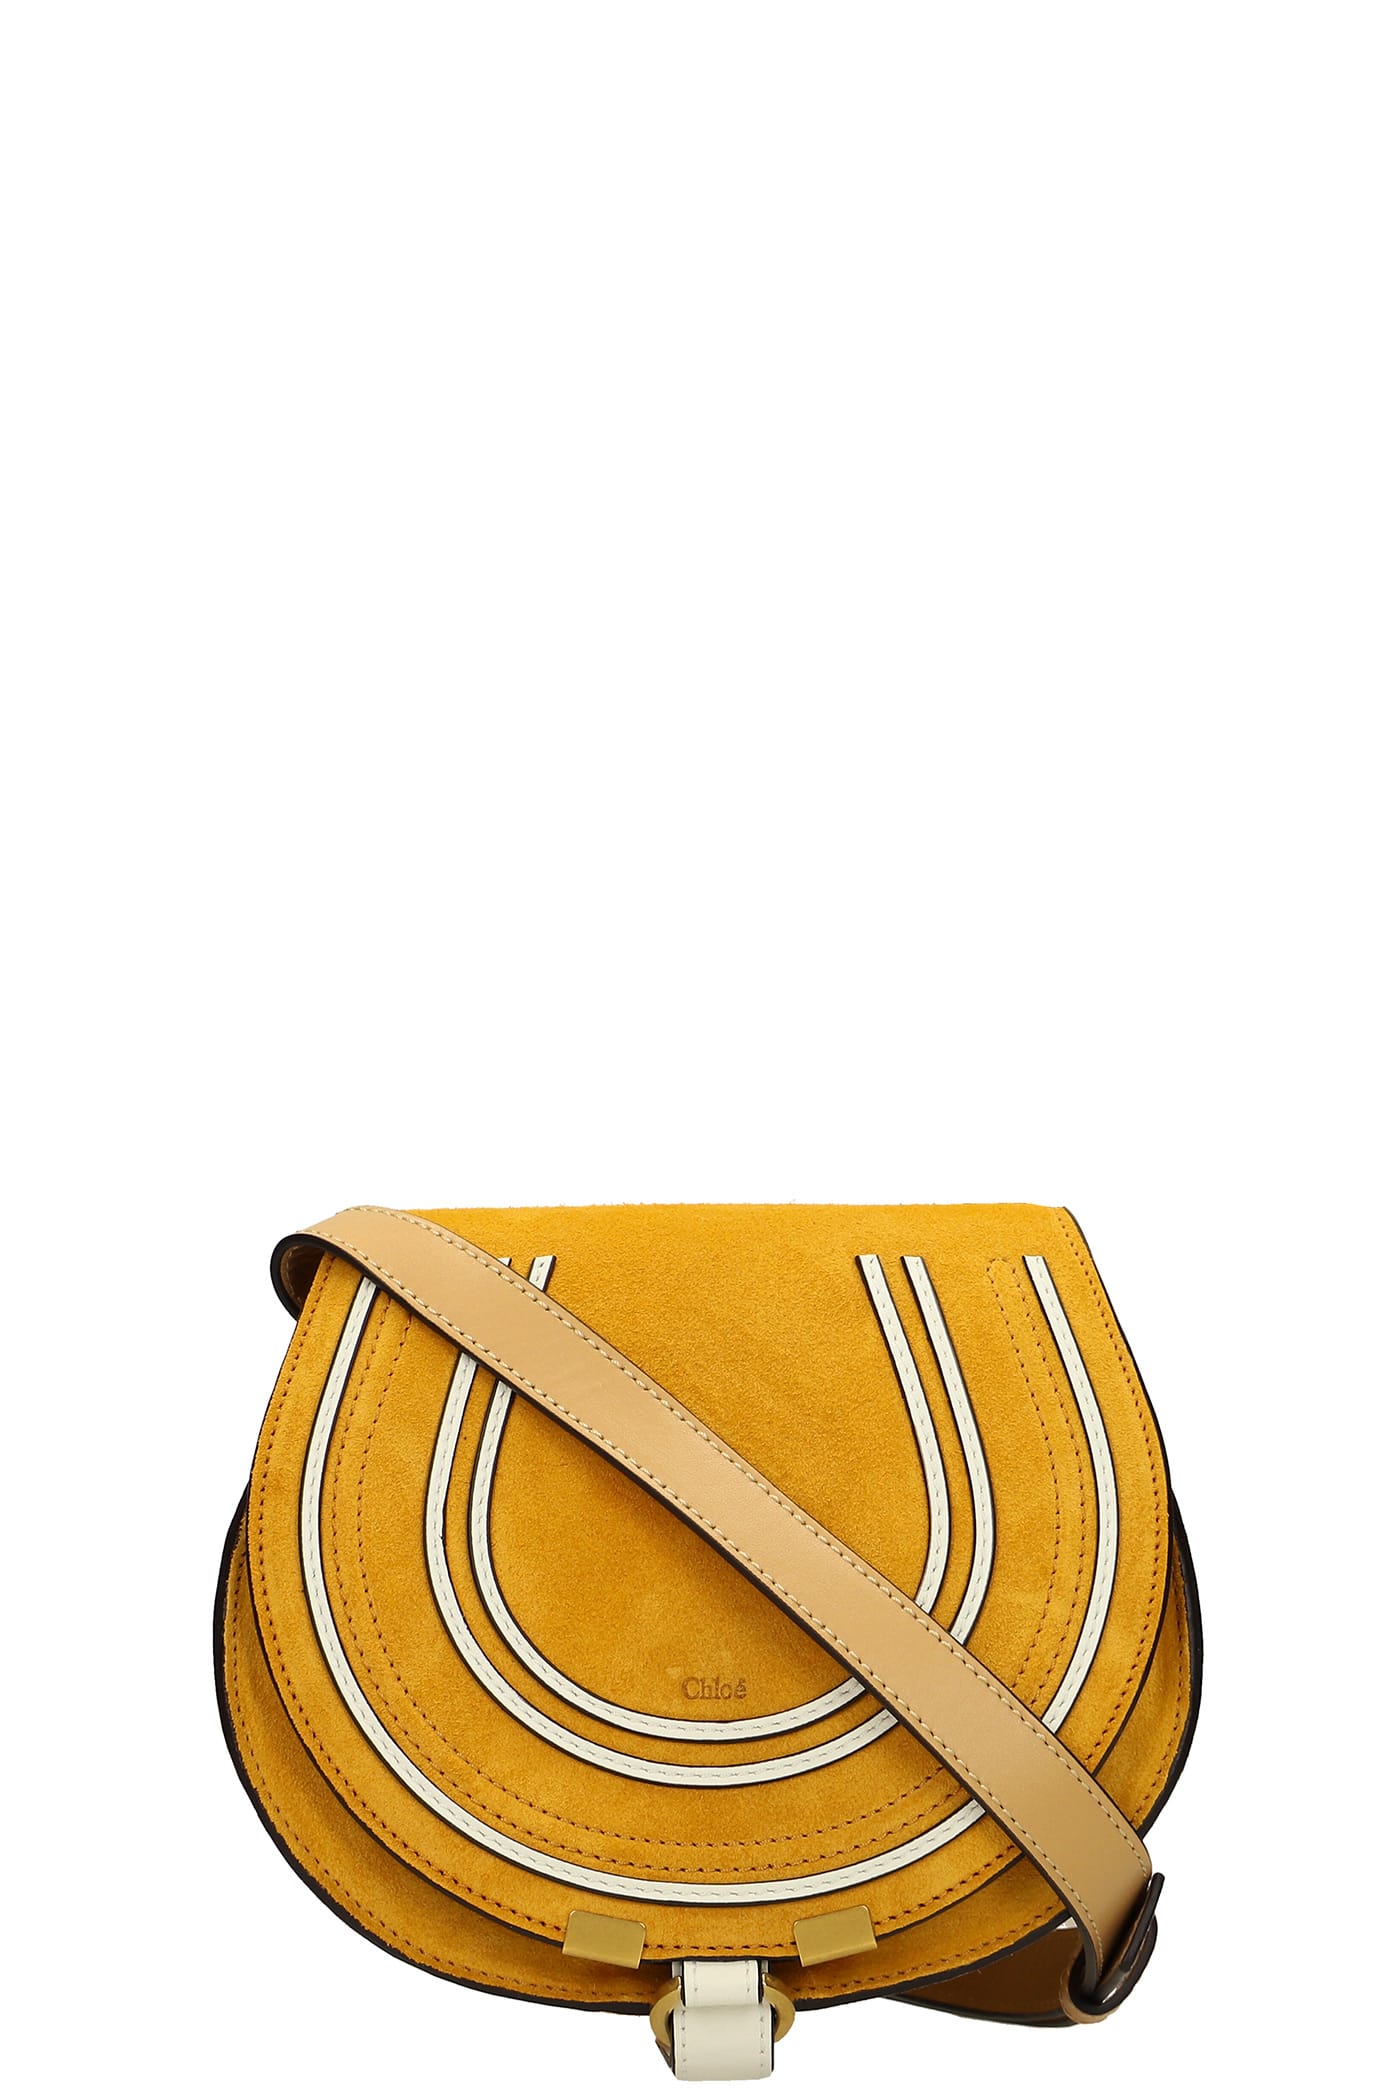 Chloé Marcie Shoulder Bag In Yellow Suede And Leather